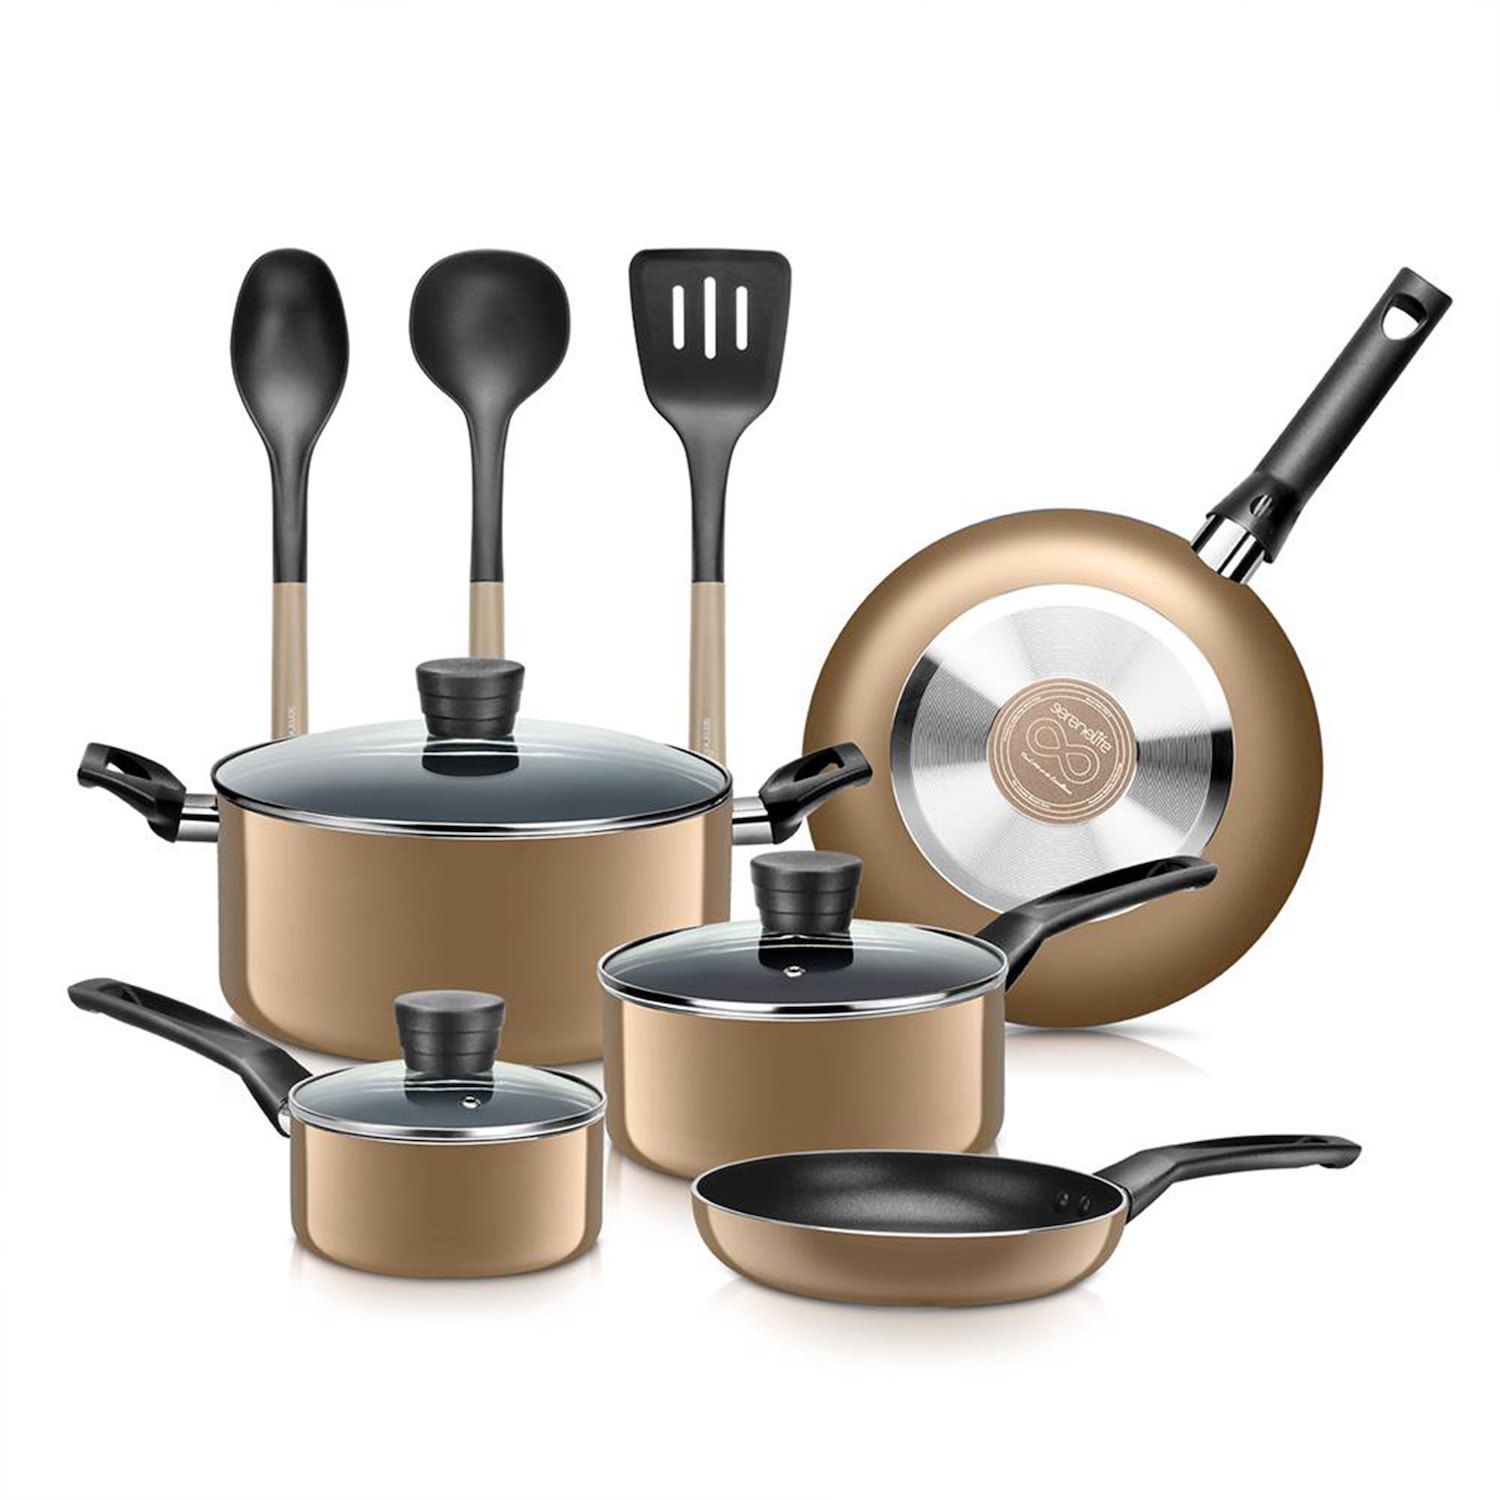 Wolfgang Puck cafe collection cookware set 15pc